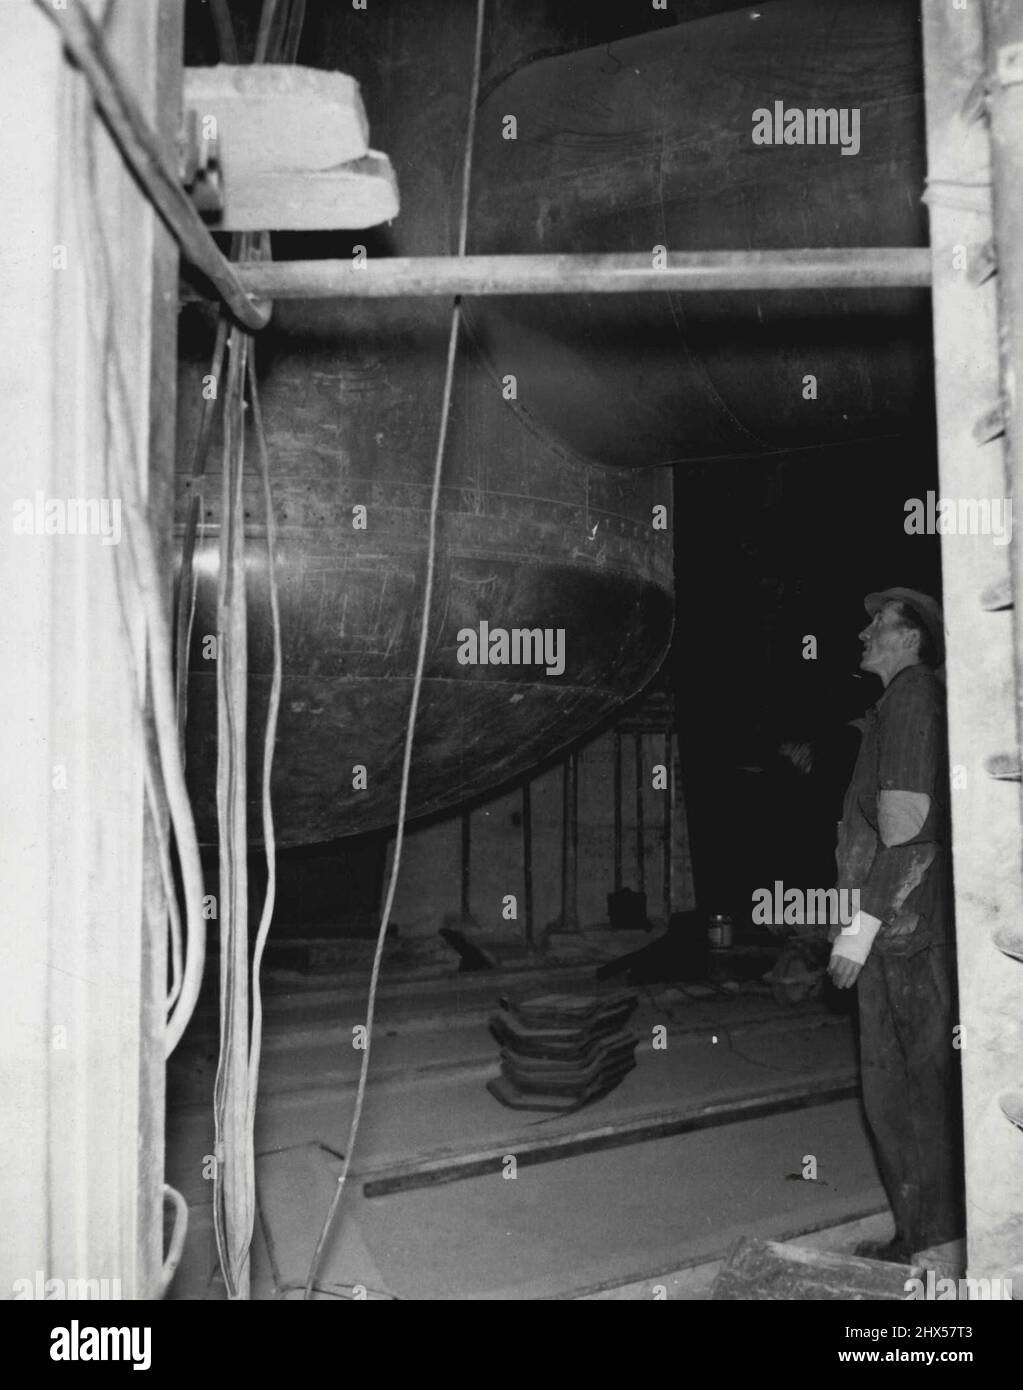 The bottom of the atomic pile, showing the base of the pressure vessel ...